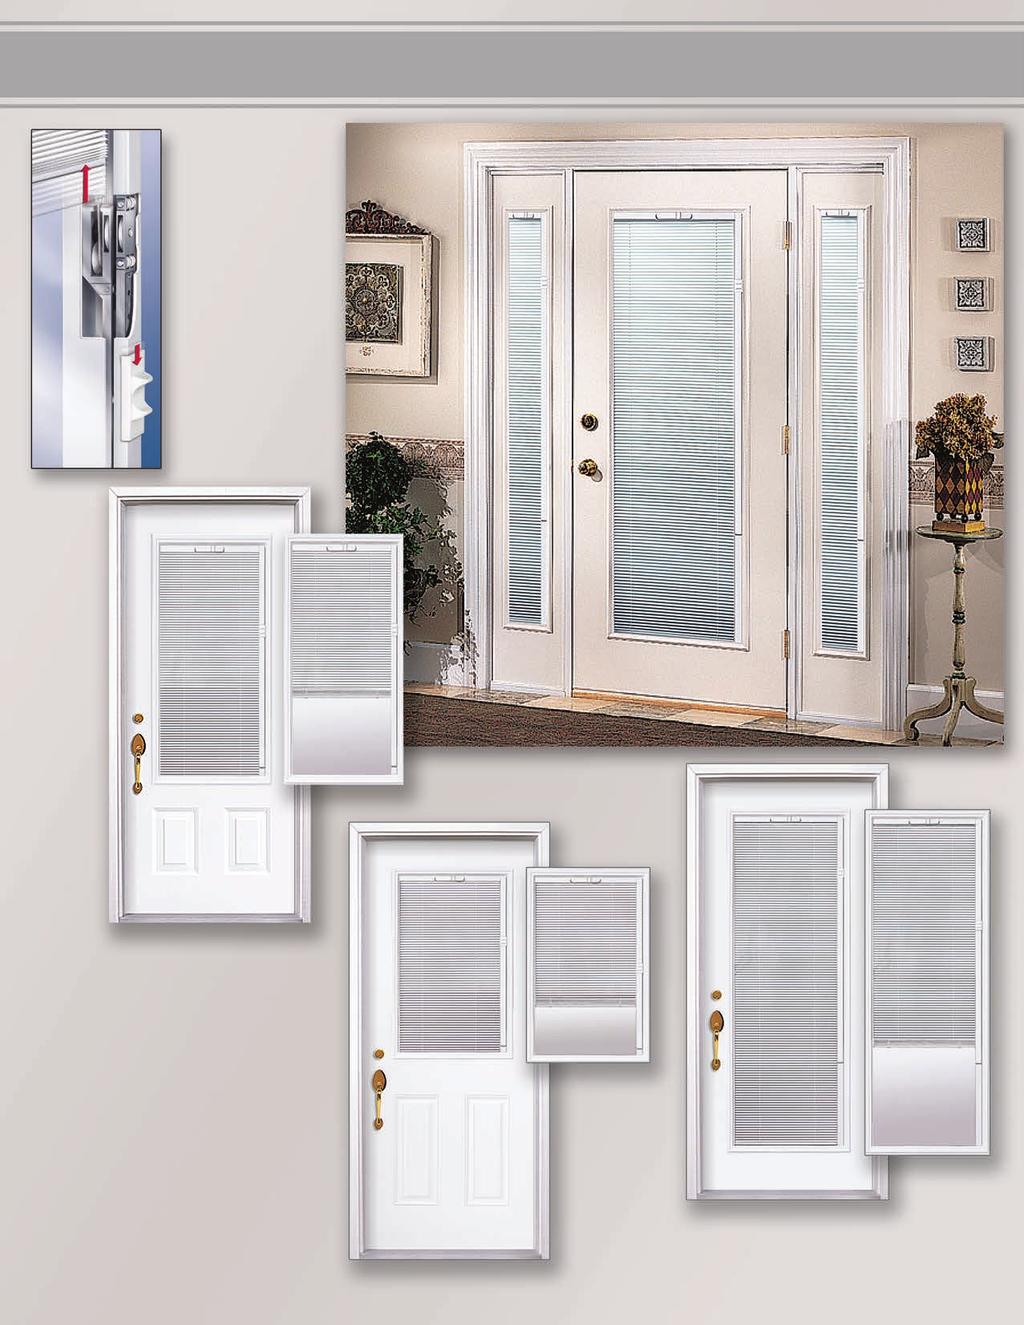 Raise & Lower Blinds Long Wearing Smooth Rollers Pulley & Lift Sping Geared Slider with a friction-free light pull feature *patent pending 2248 Raise & Lower Blinds have a grate slider